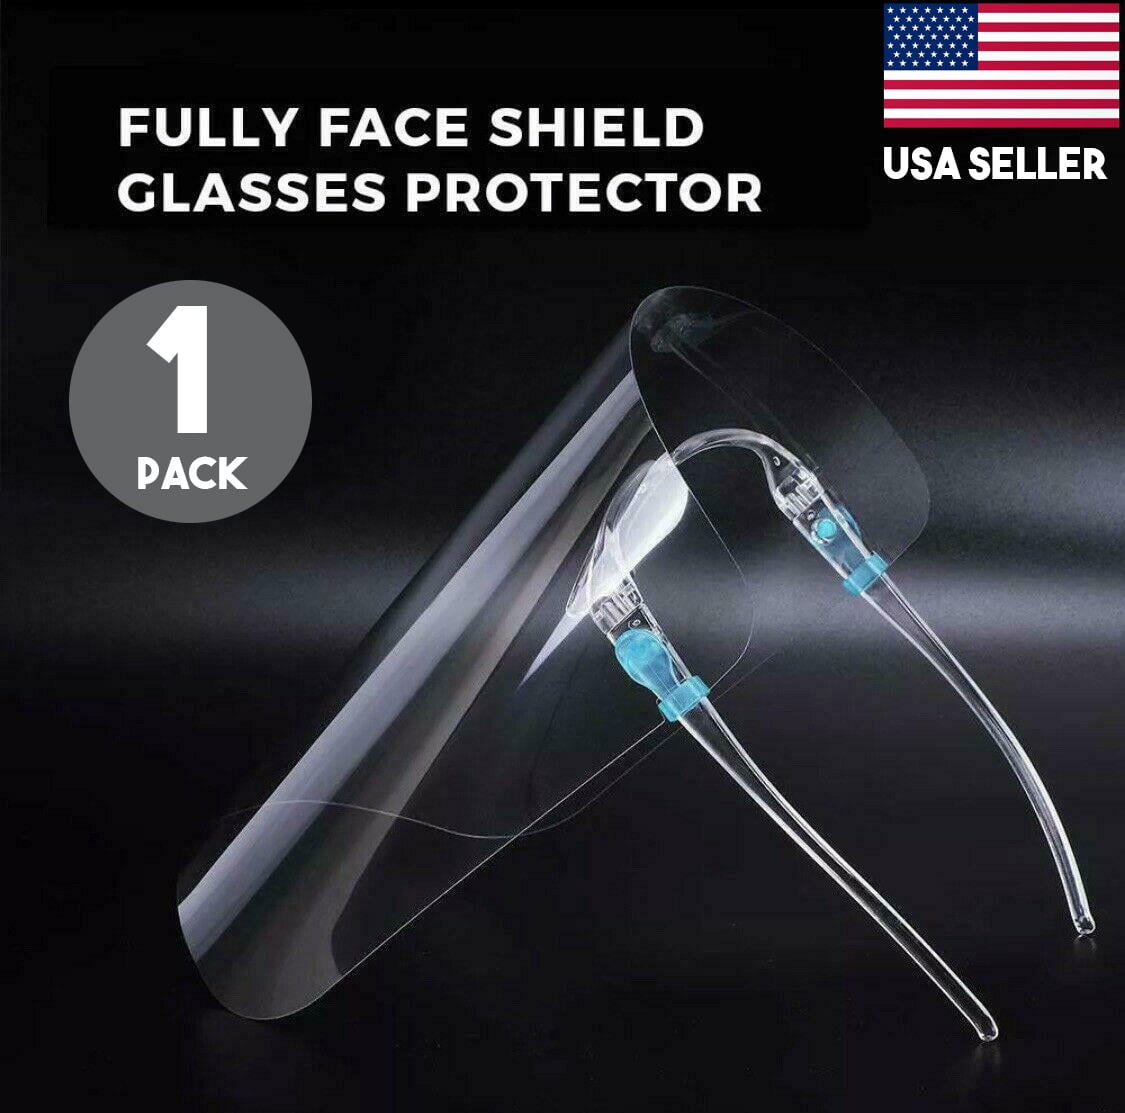 Set of 4 Face Shield Glass Protection with Free Shipping US Seller 